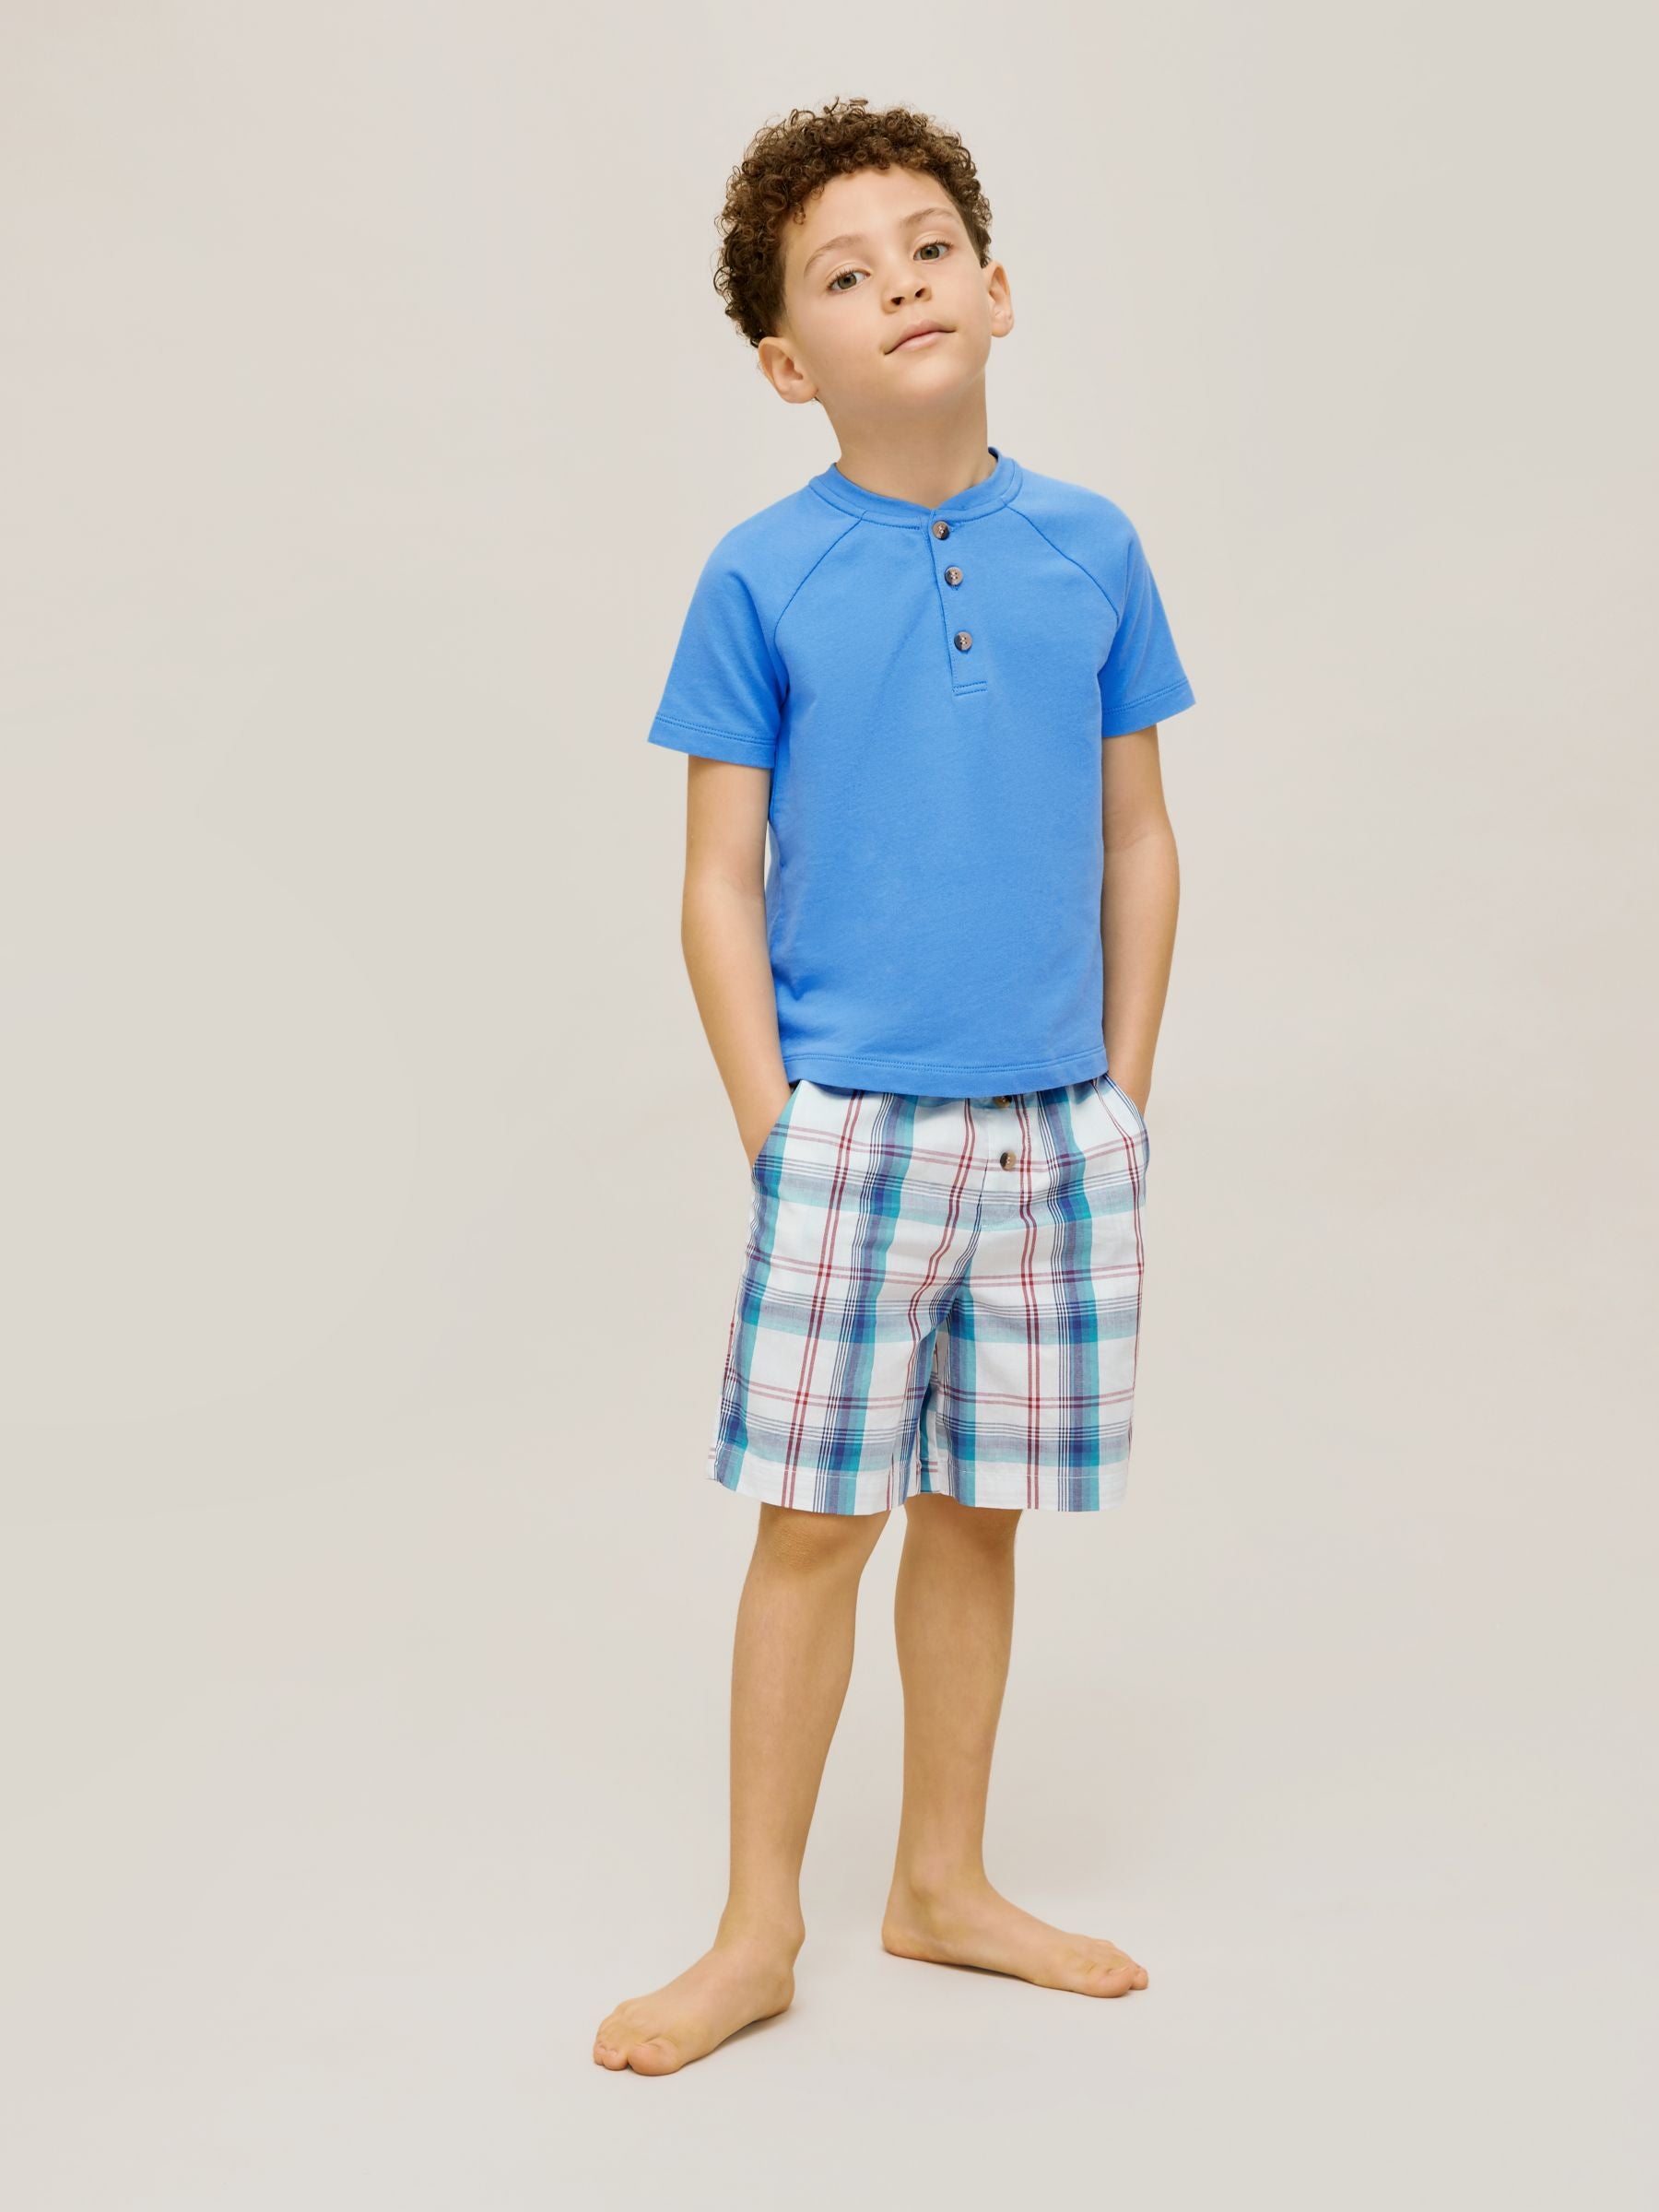 Stylish Boys Tops: Discover the Latest Collection by Finelook